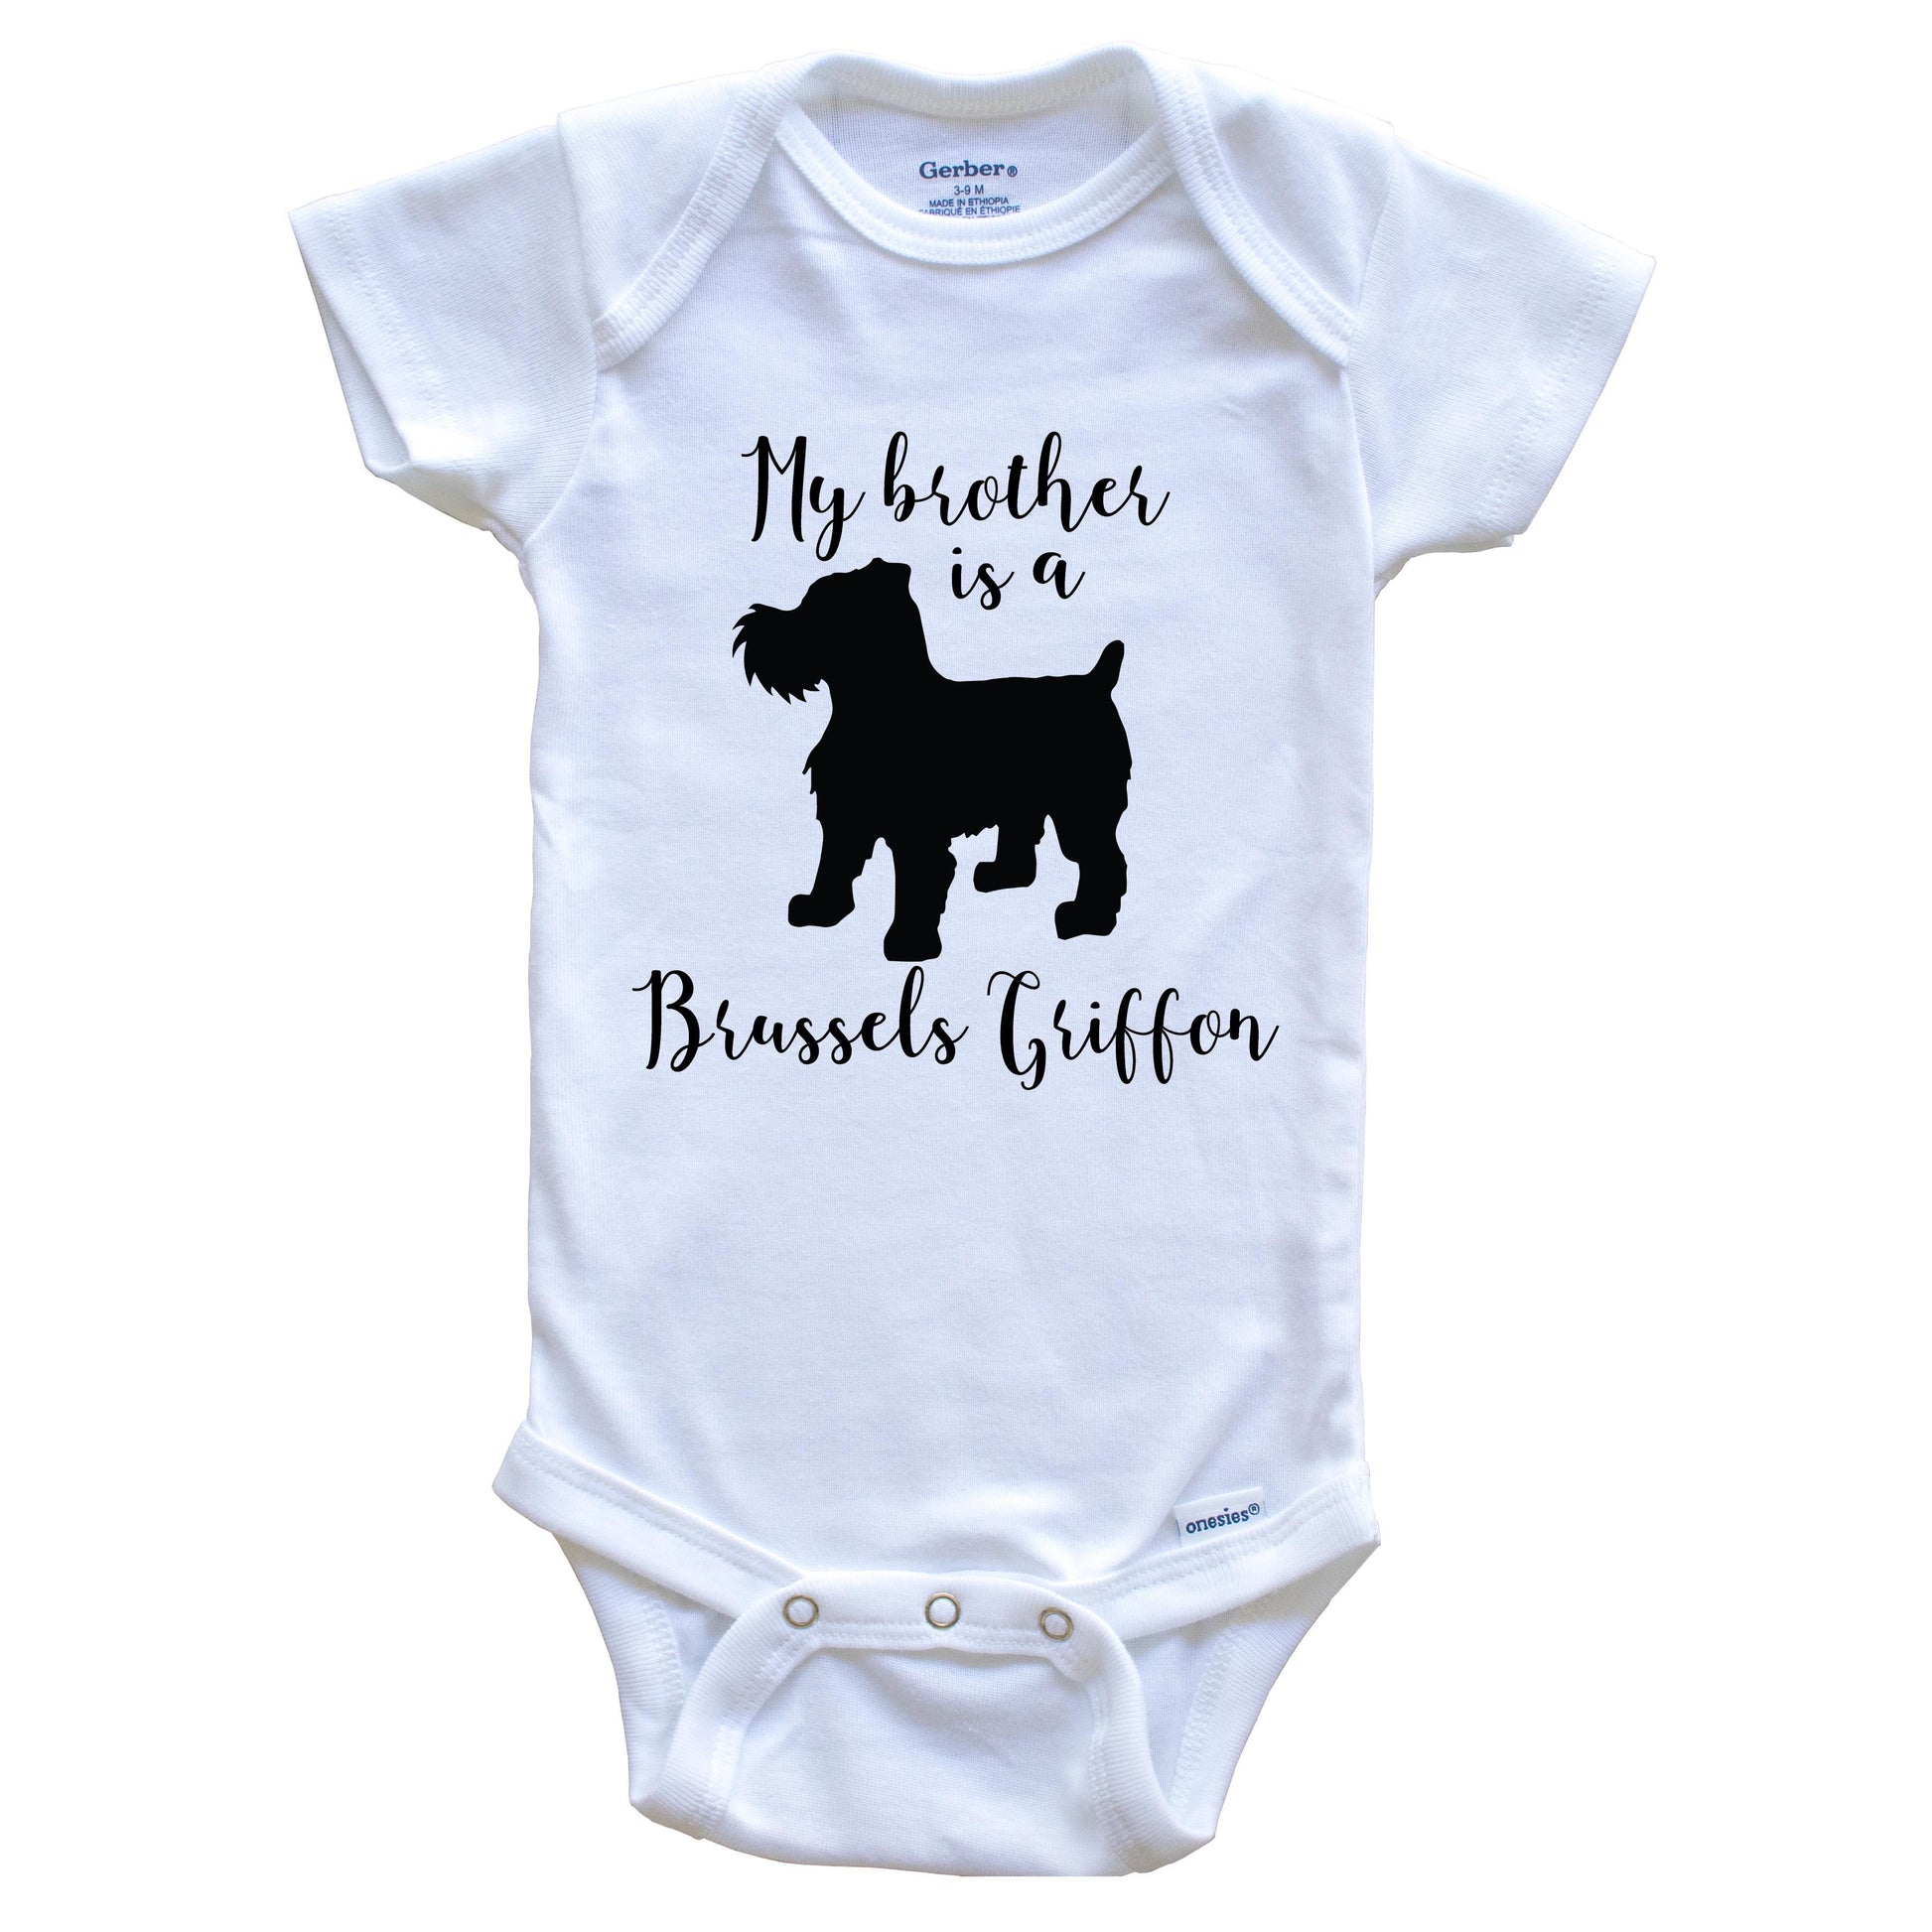 My Brother Is A Brussels Griffon Cute Dog Baby Onesie - Brussels Griffon One Piece Baby Bodysuit